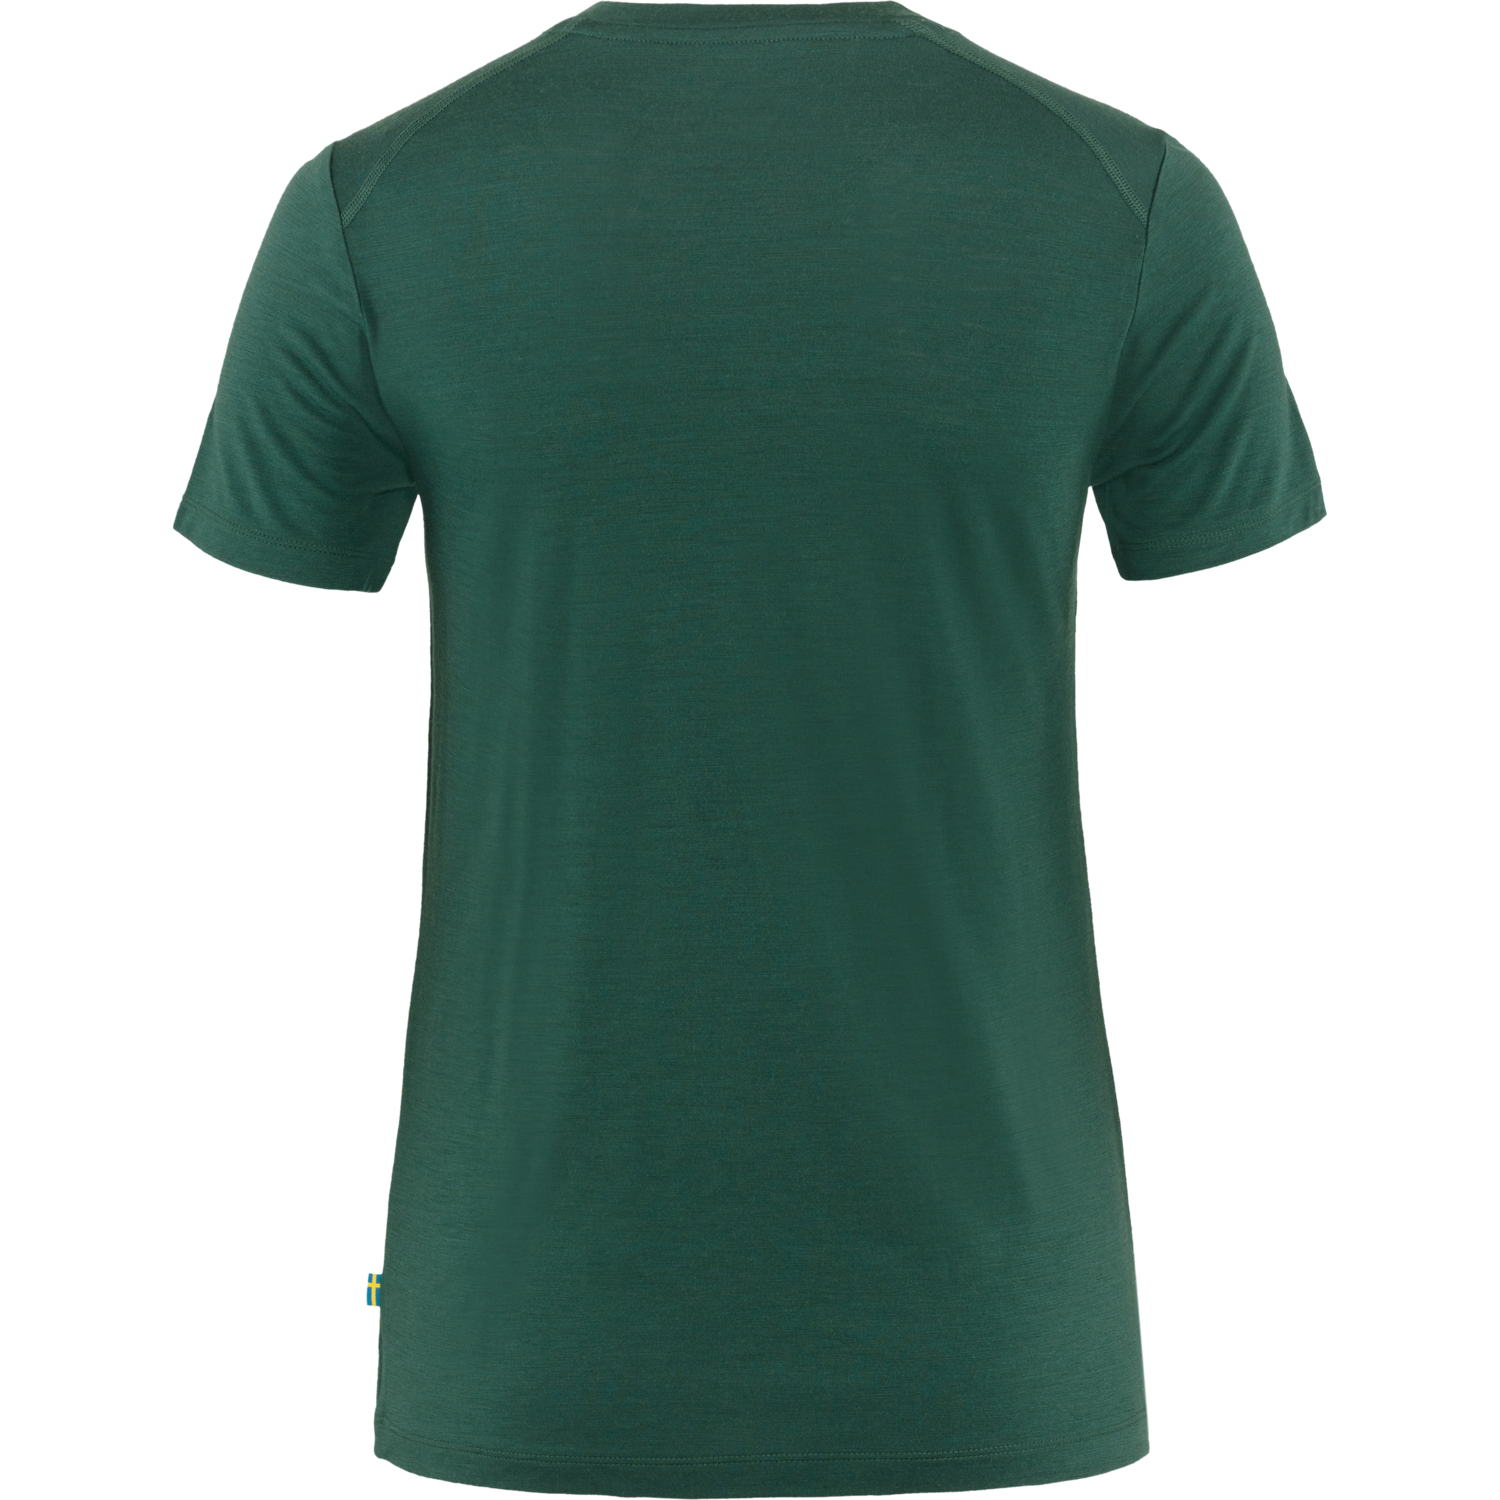 Women green top or t-shirt  for both warm or cold climate.